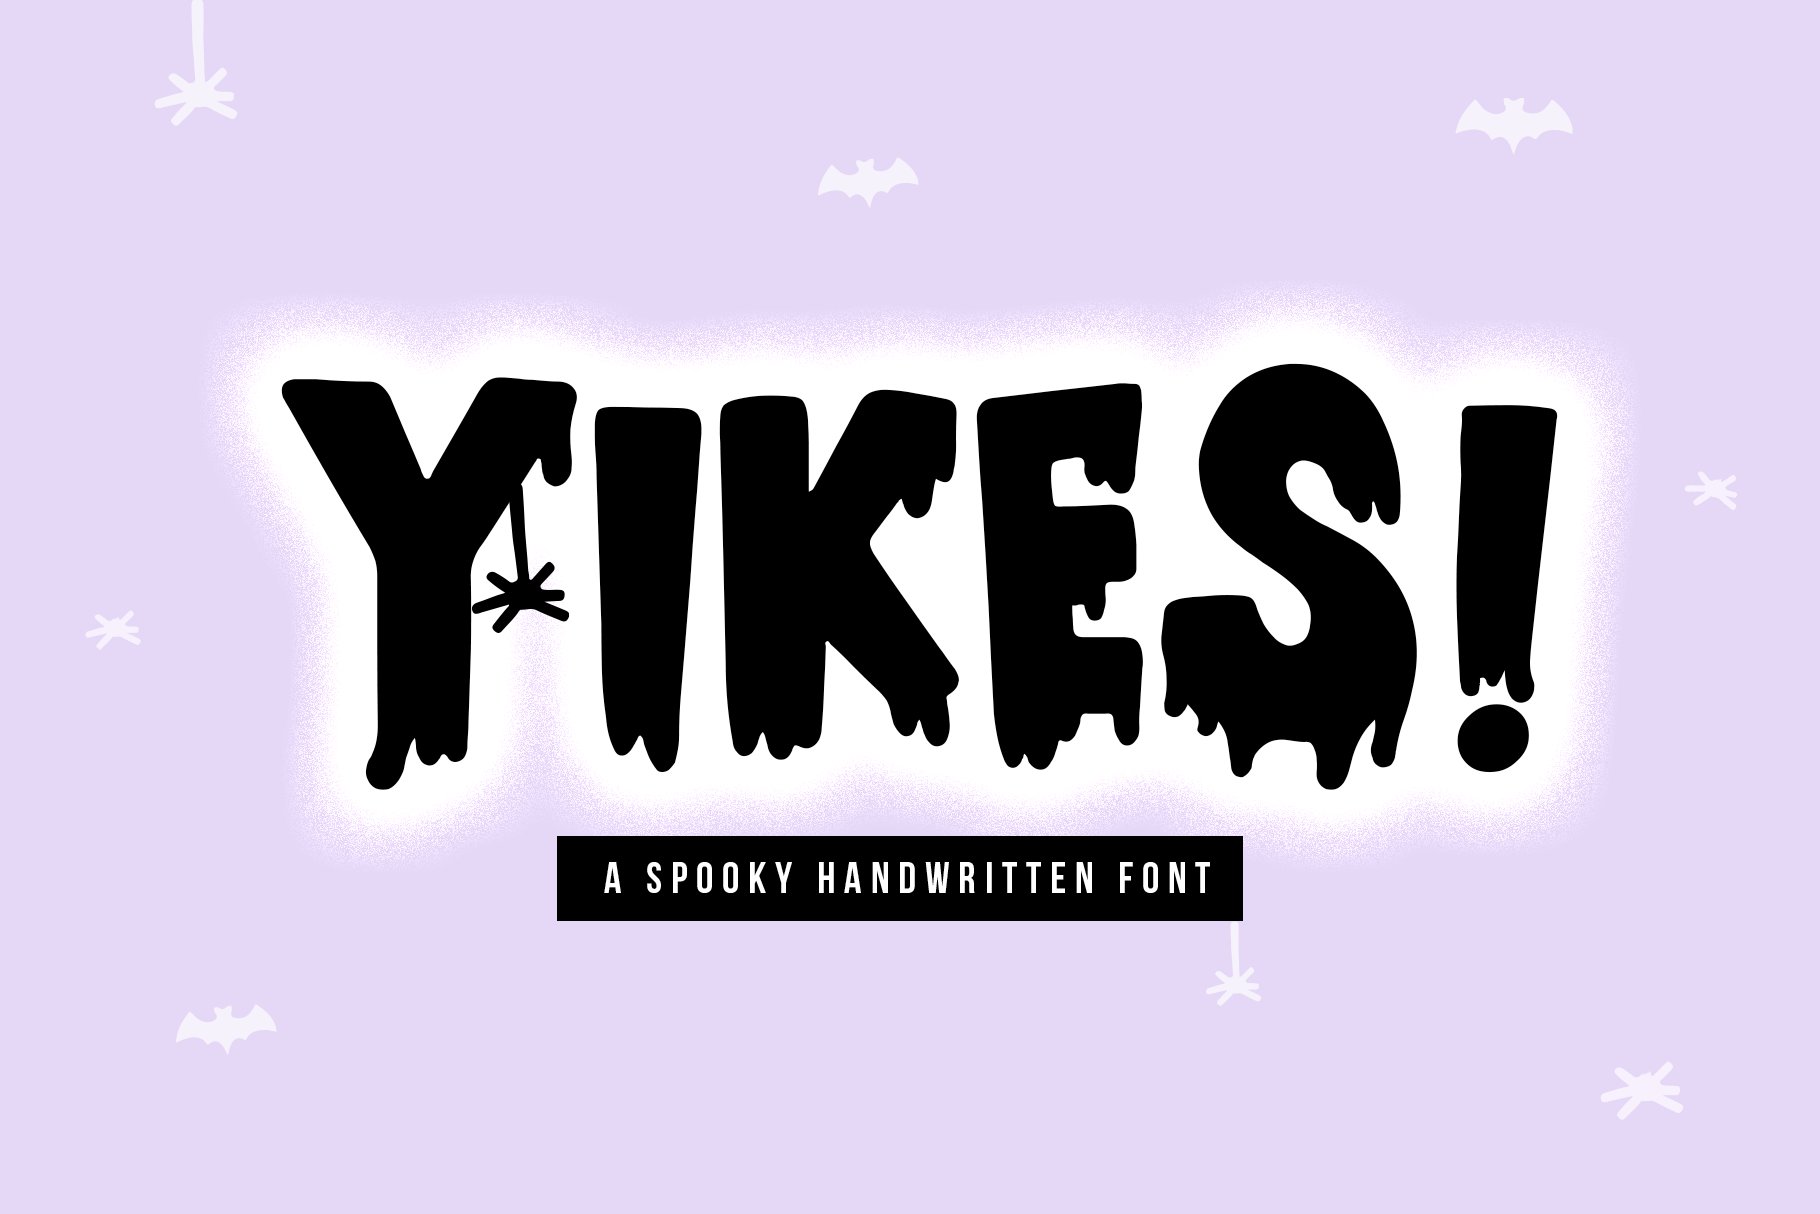 Yikes | Dripping Halloween Font cover image.